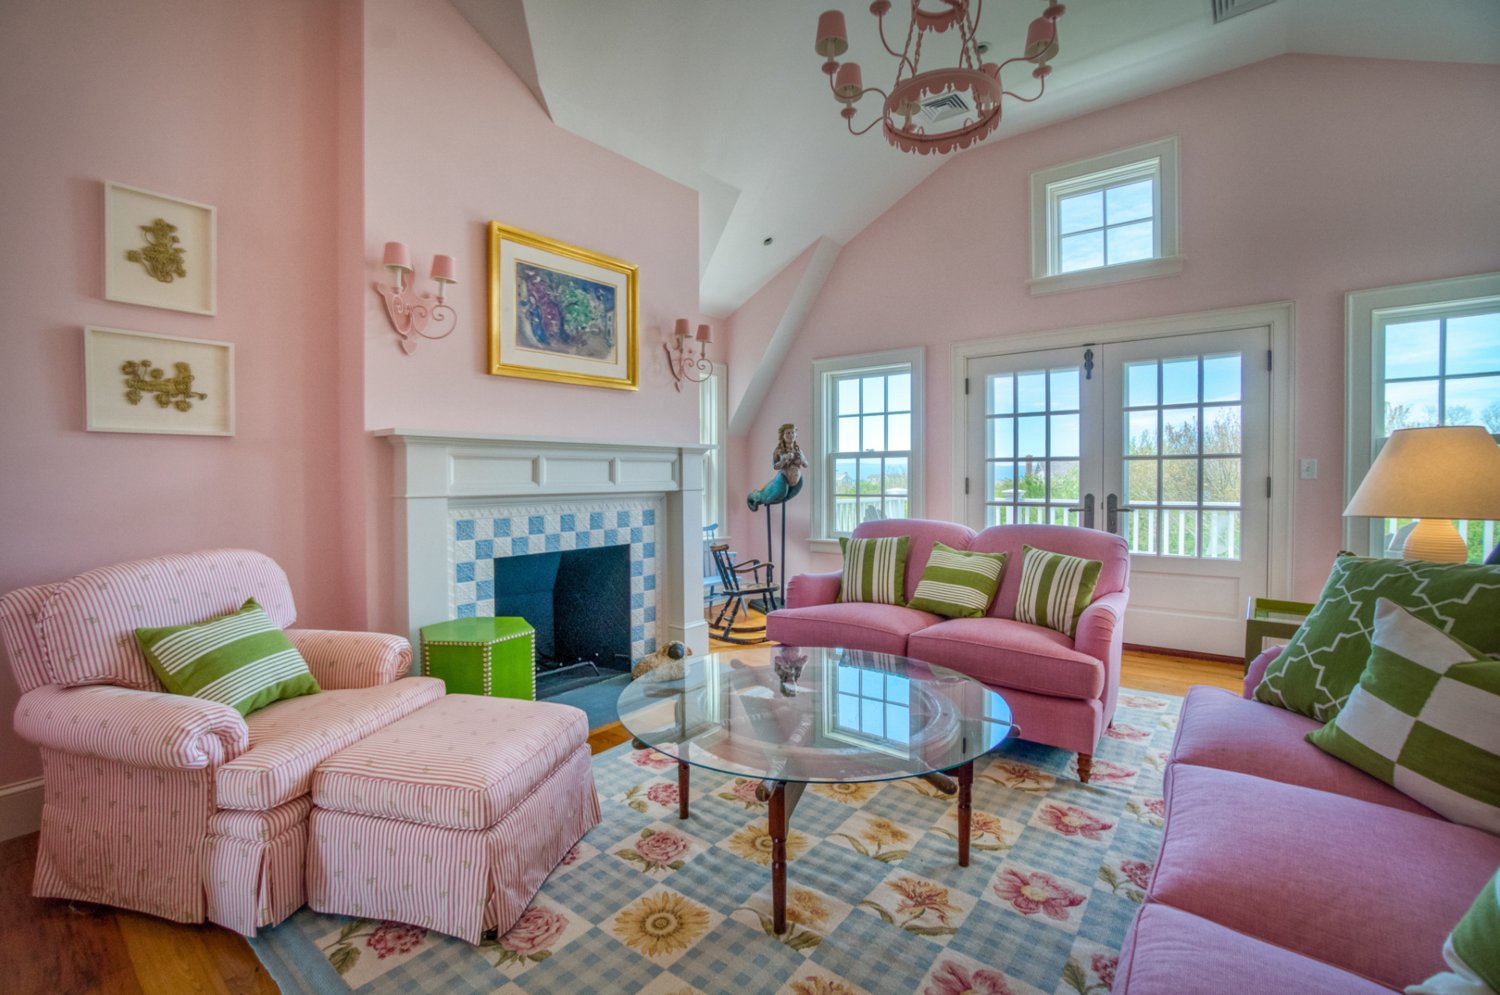 This second-floor sitting room has a fireplace, cathedral ceiling and a balcony with water views.